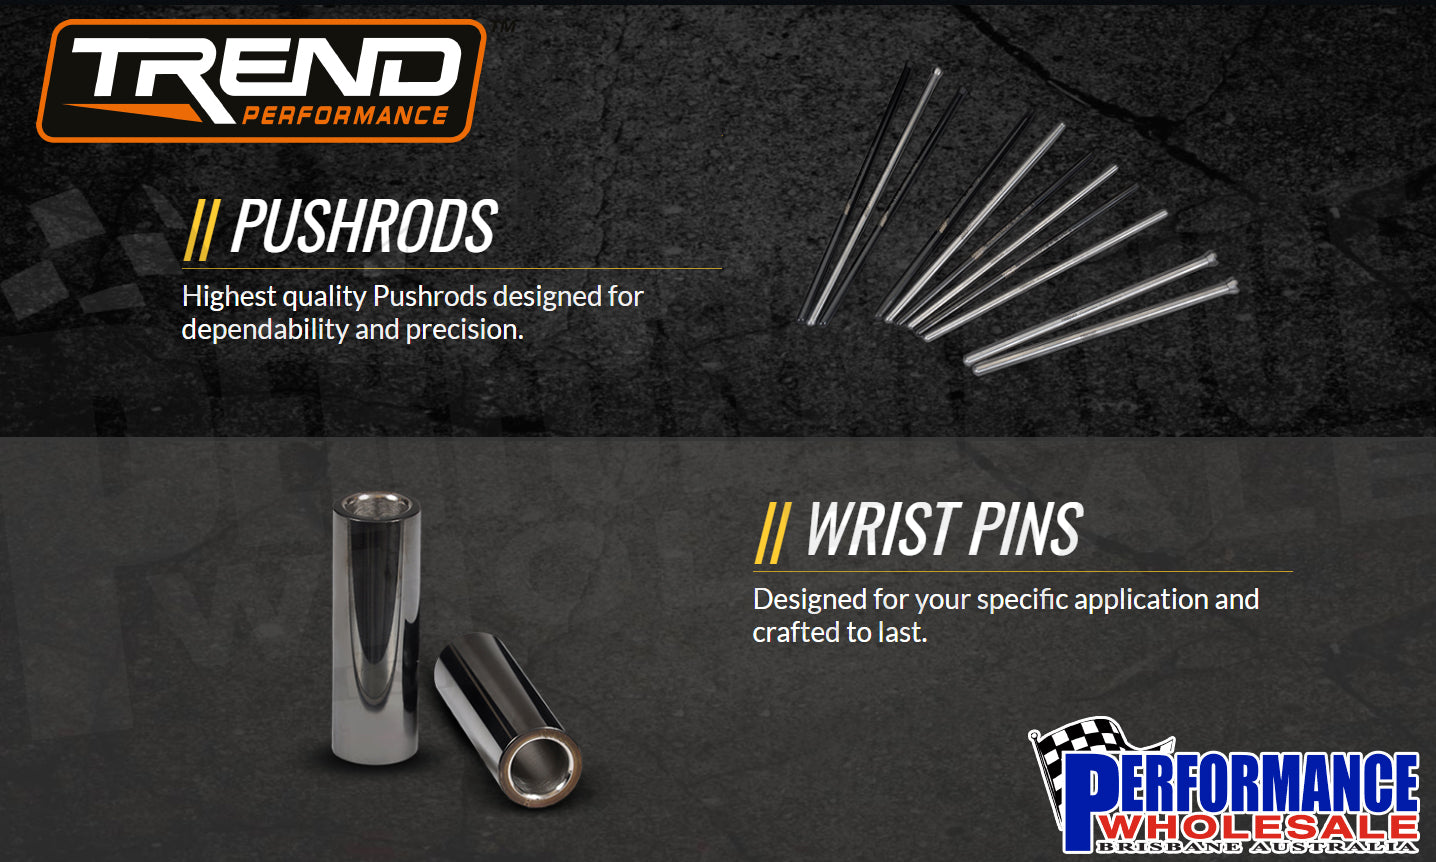 Trend Performance Pushrods and wrist pins